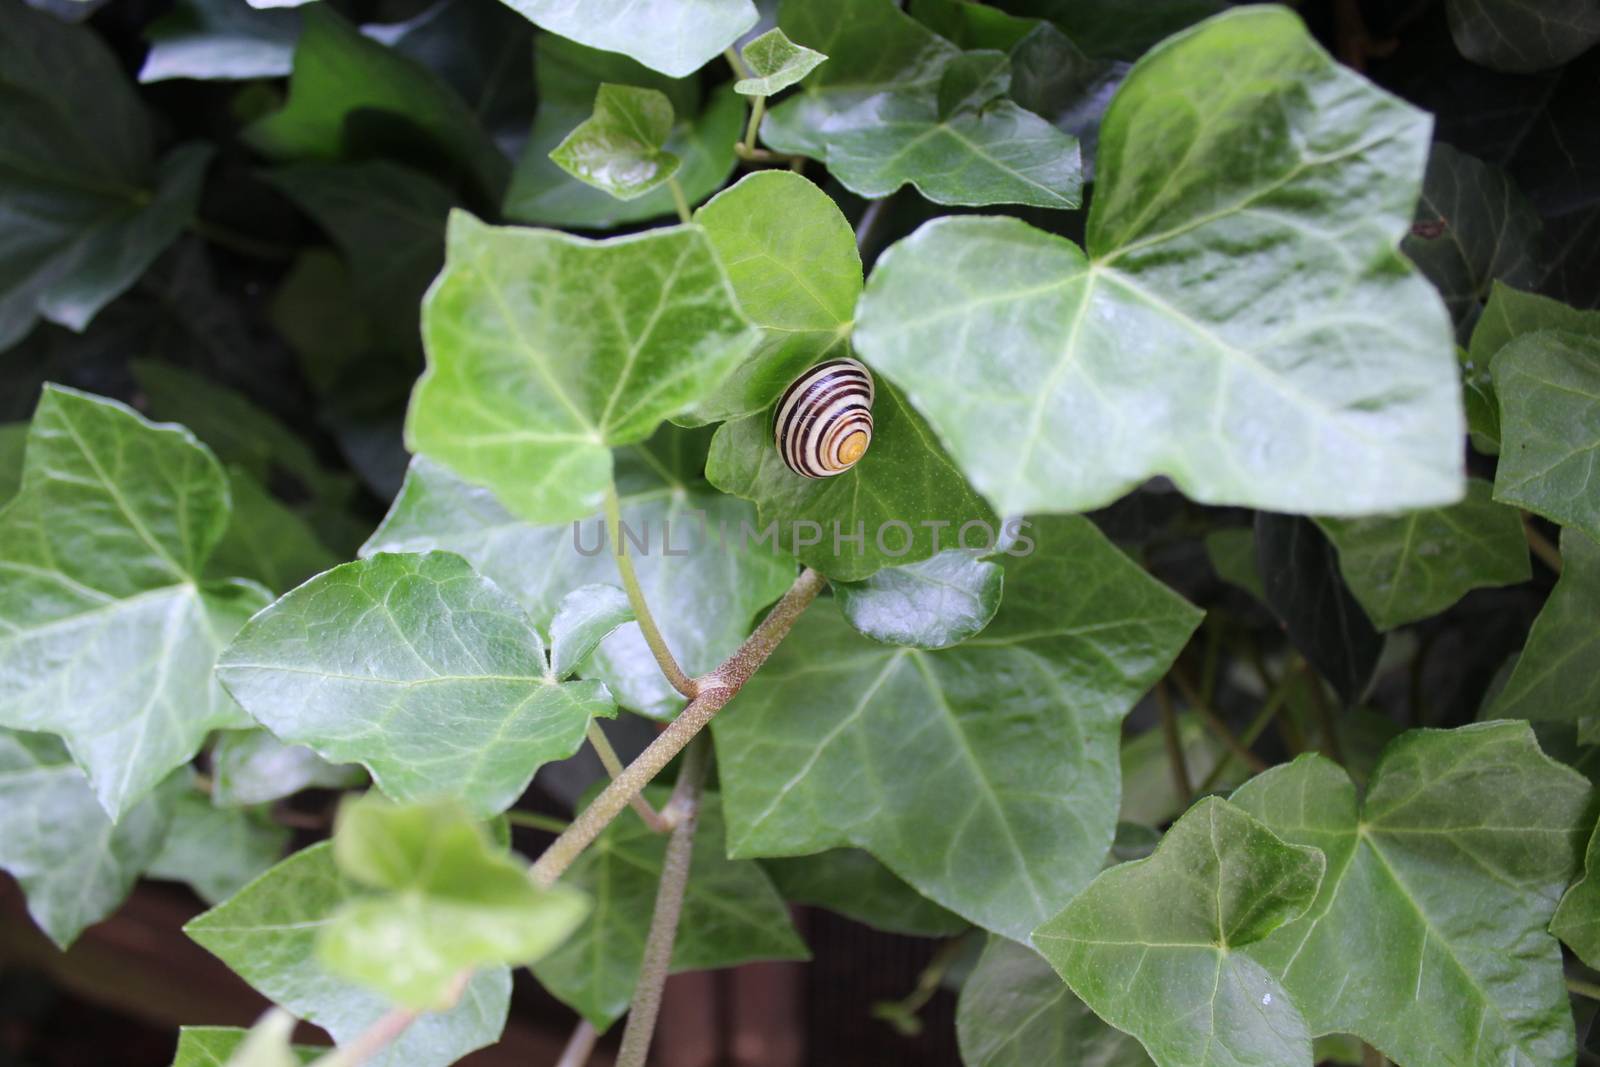 The picture shows ivy with a little snail.